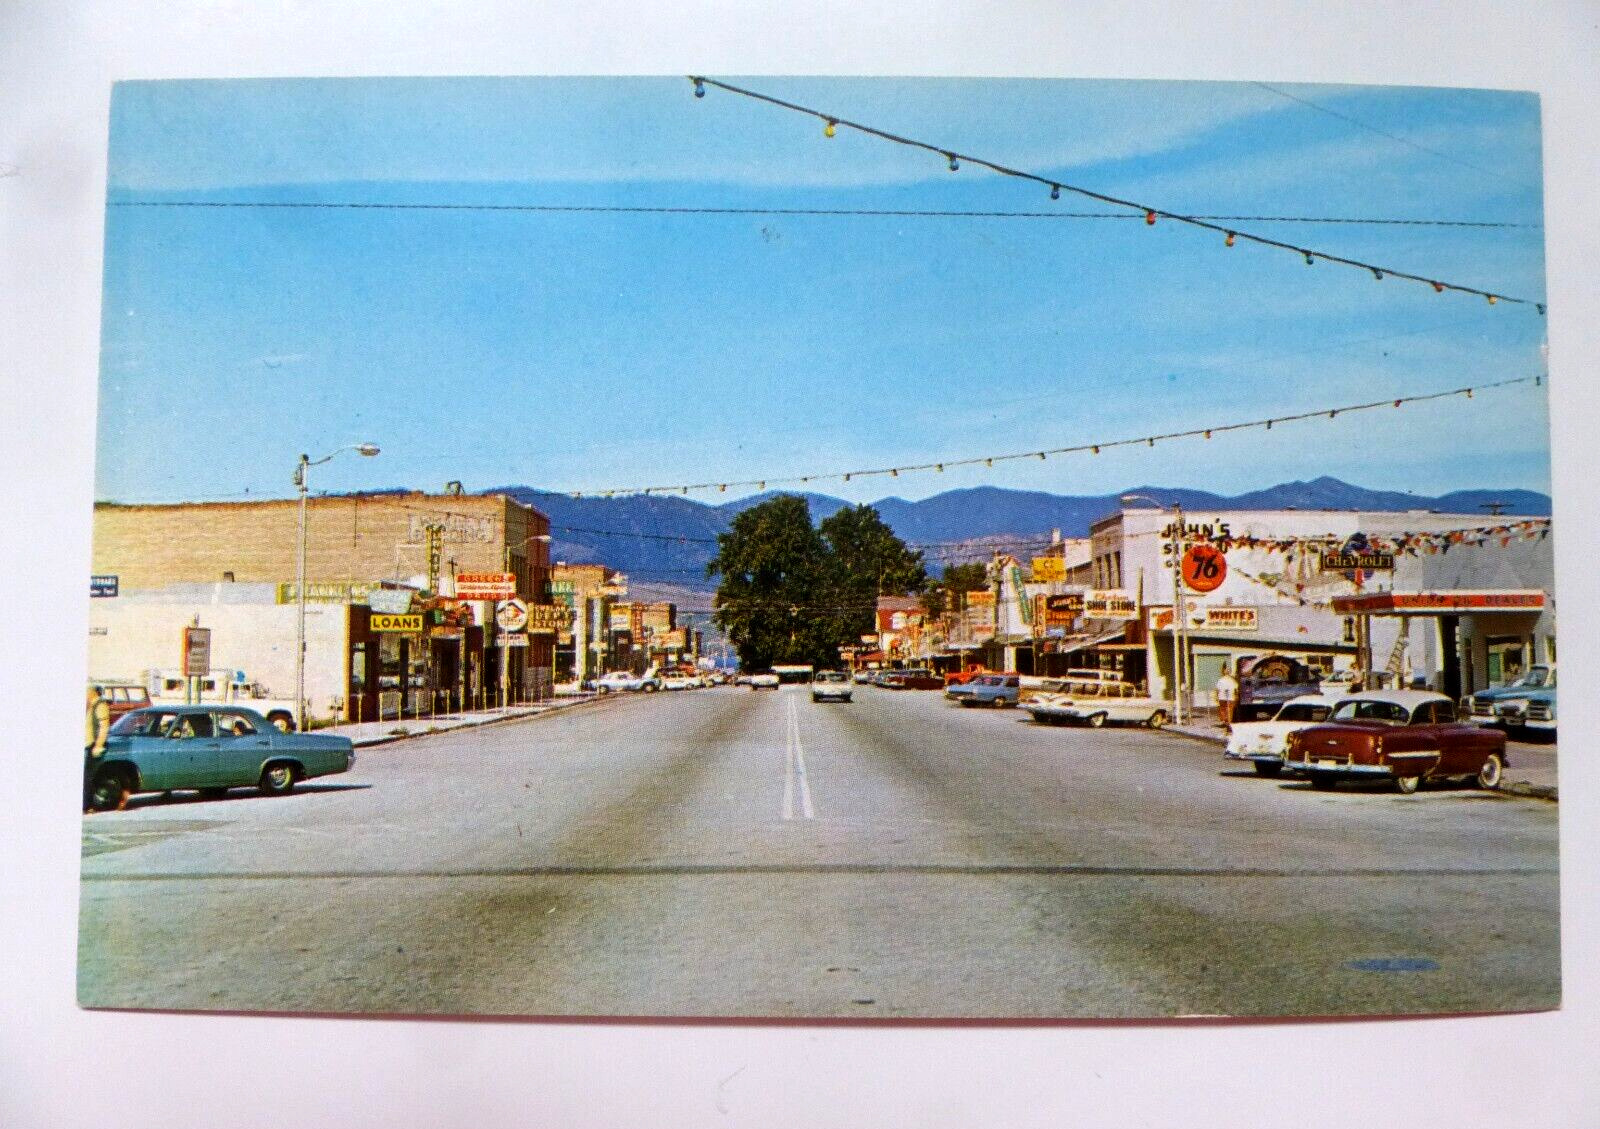 CHELAN, WASHINGTON Post Card, Main Street with CARS, Downtown, Unposted, 1960's